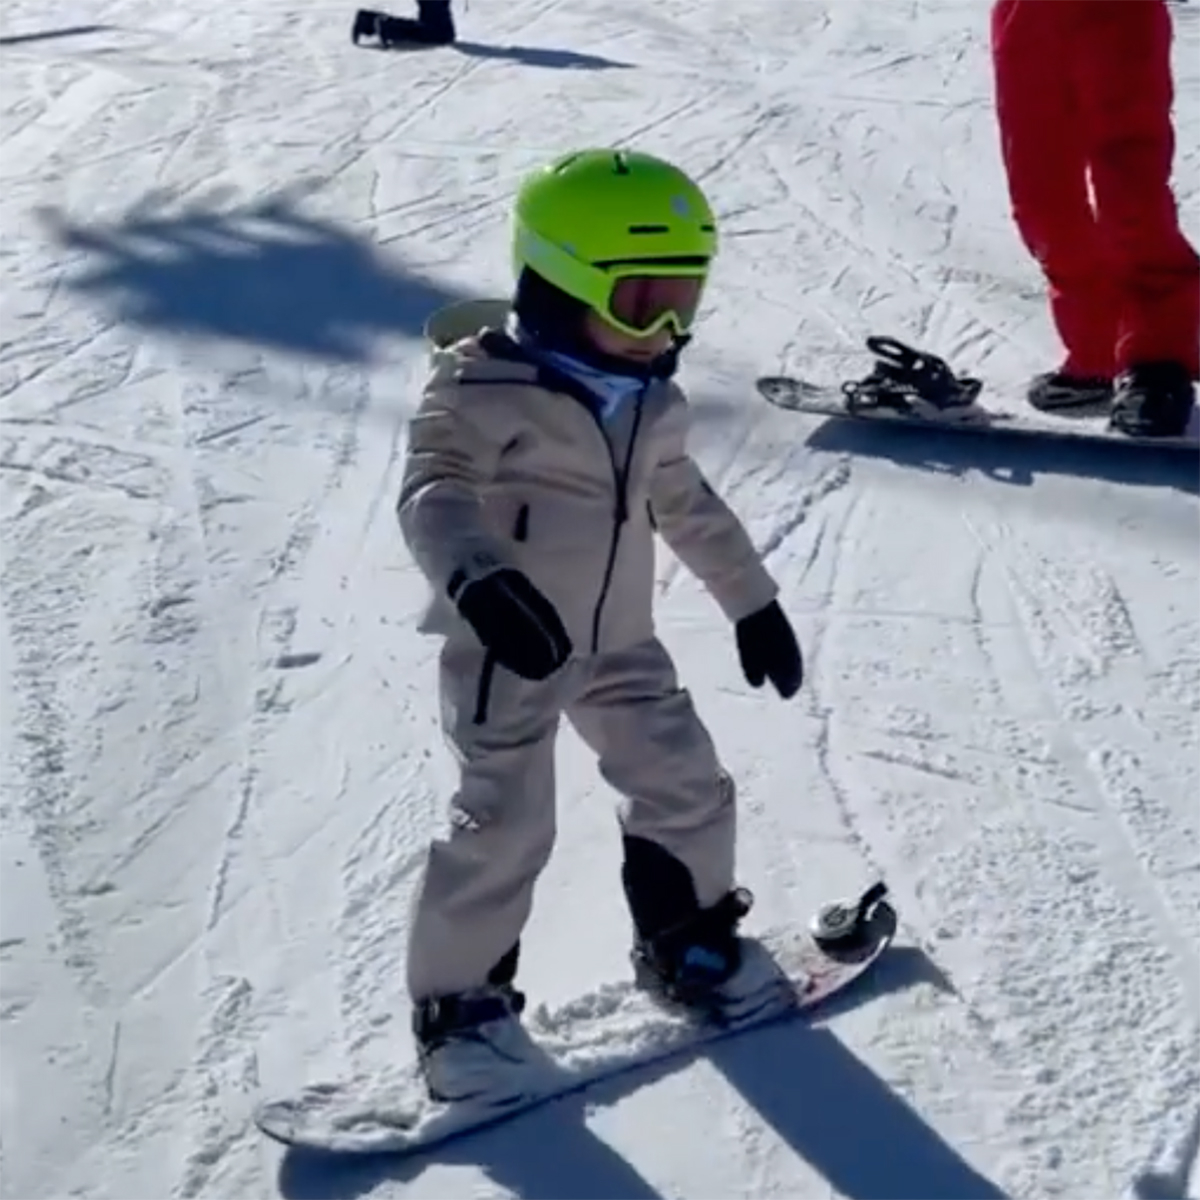 Kylie Jenner’s daughter Stormi shows off her snowboarding skills